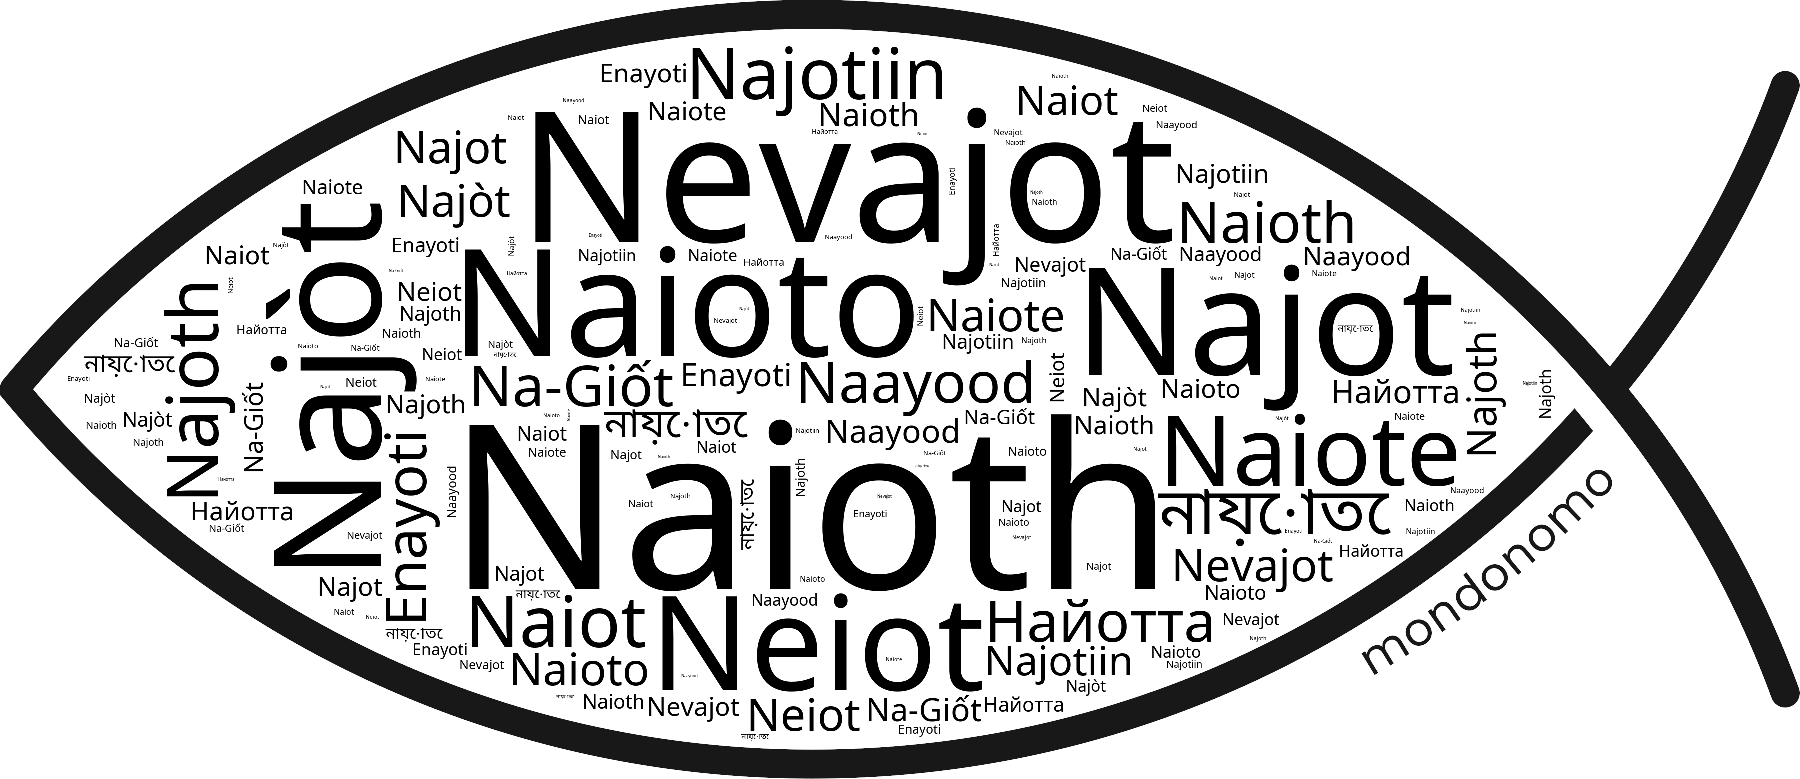 Name Naioth in the world's Bibles